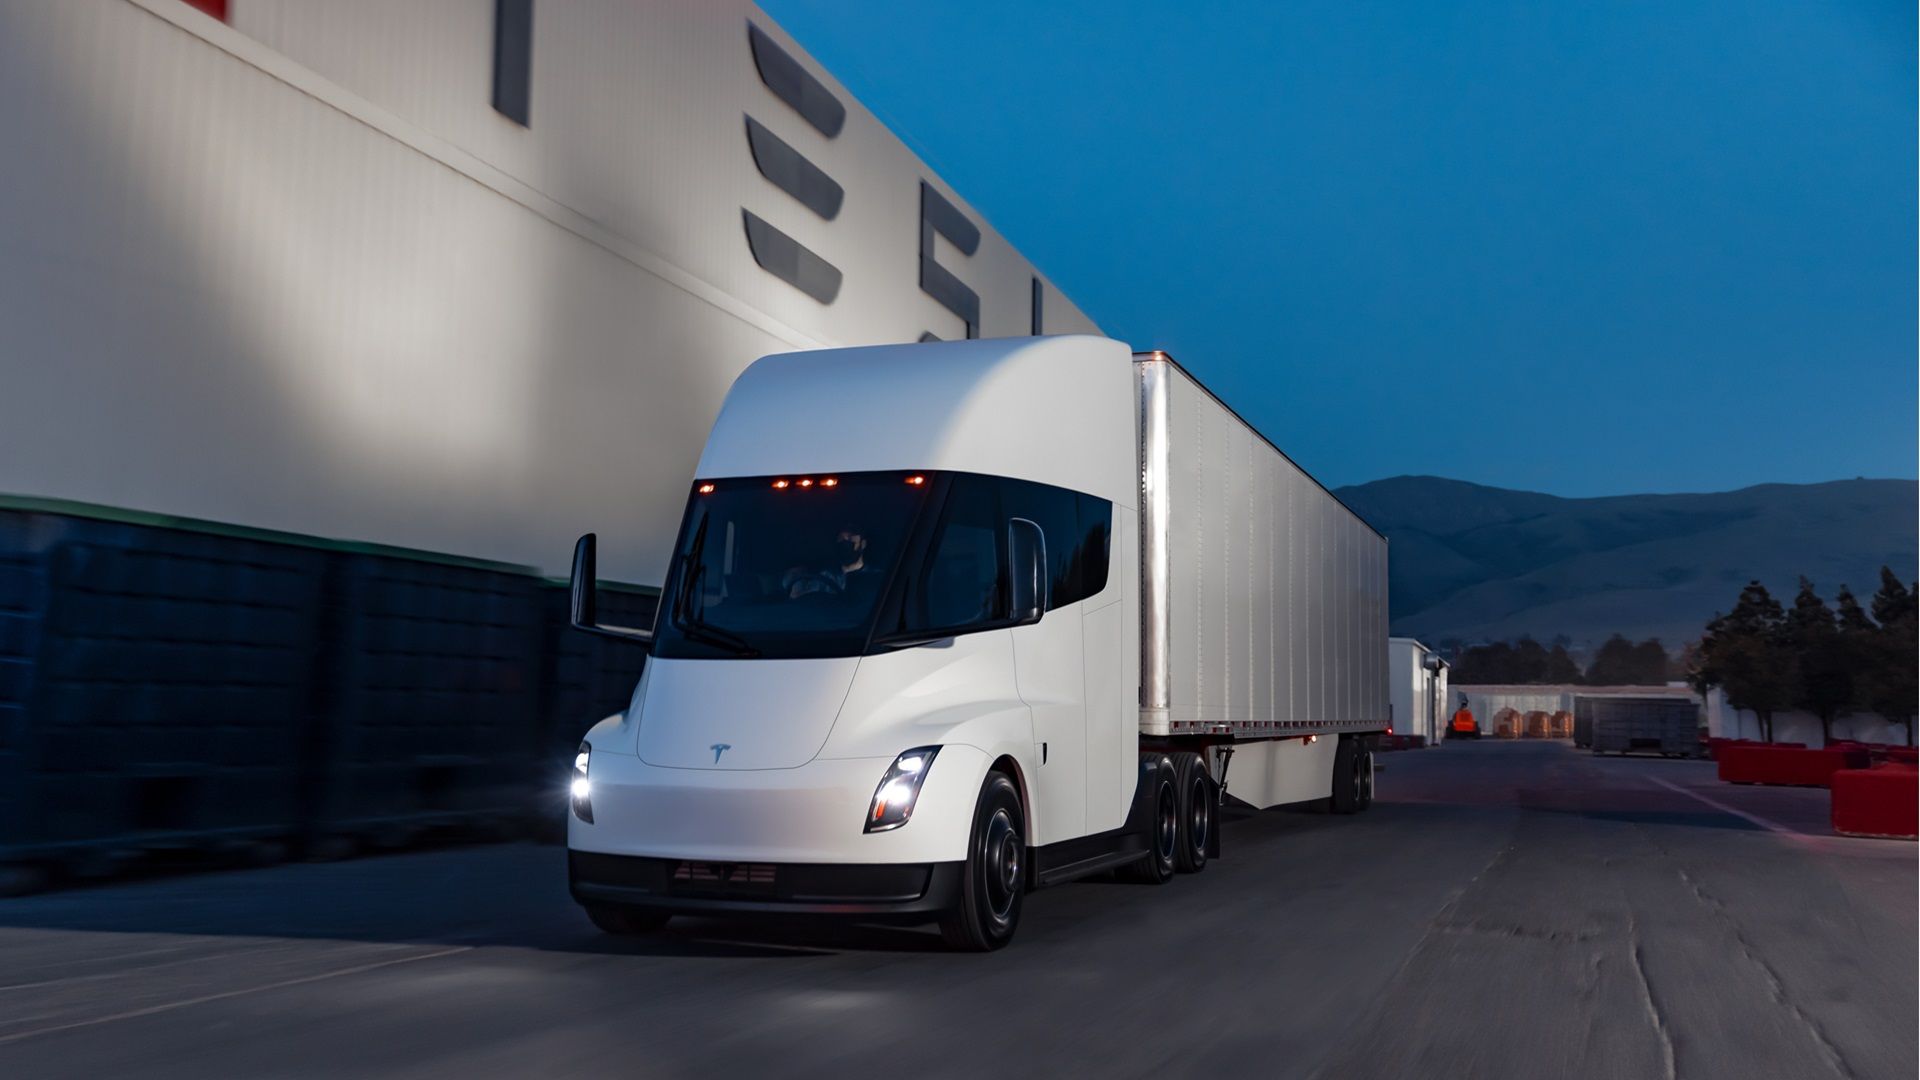 10 Things You Need To Know About The Tesla Semi Truck